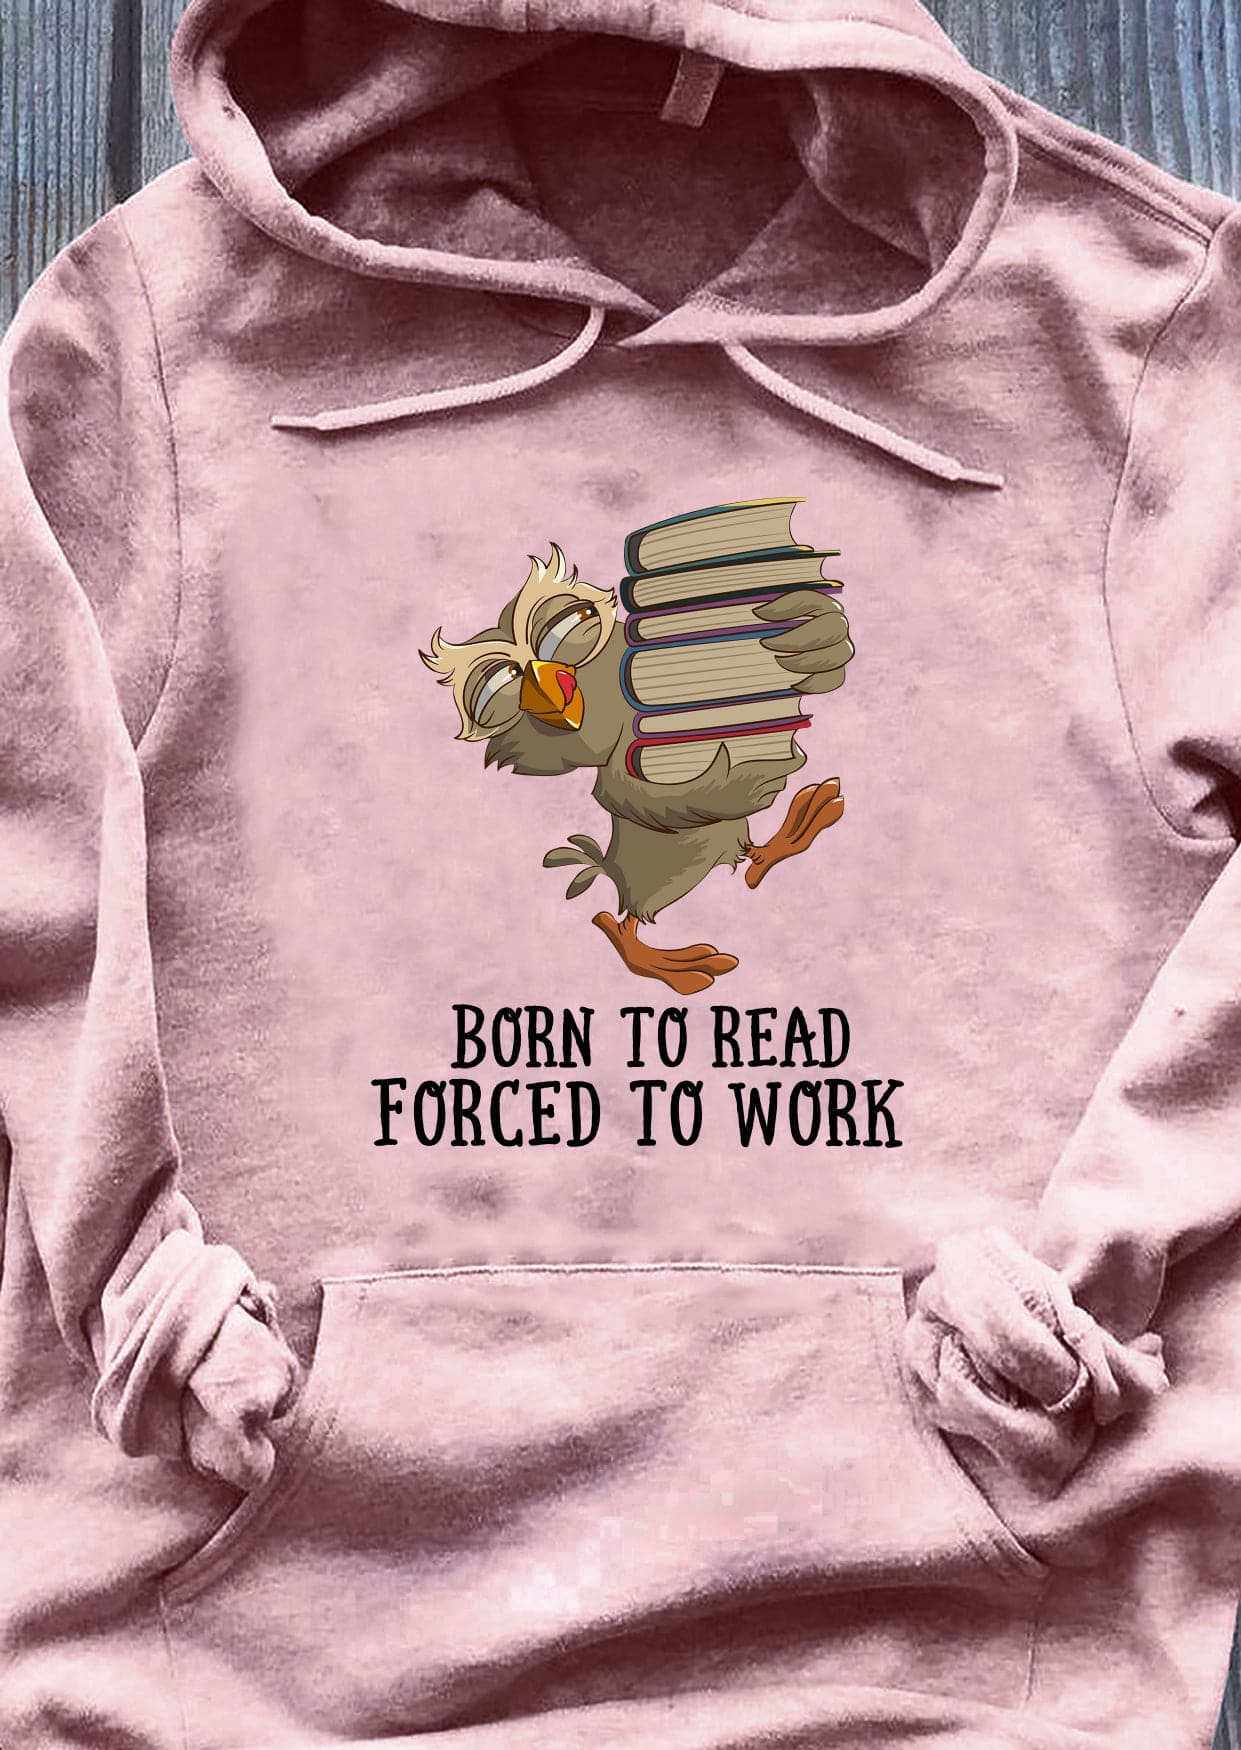 Born to read, forced to work - Owl and books, born to read book